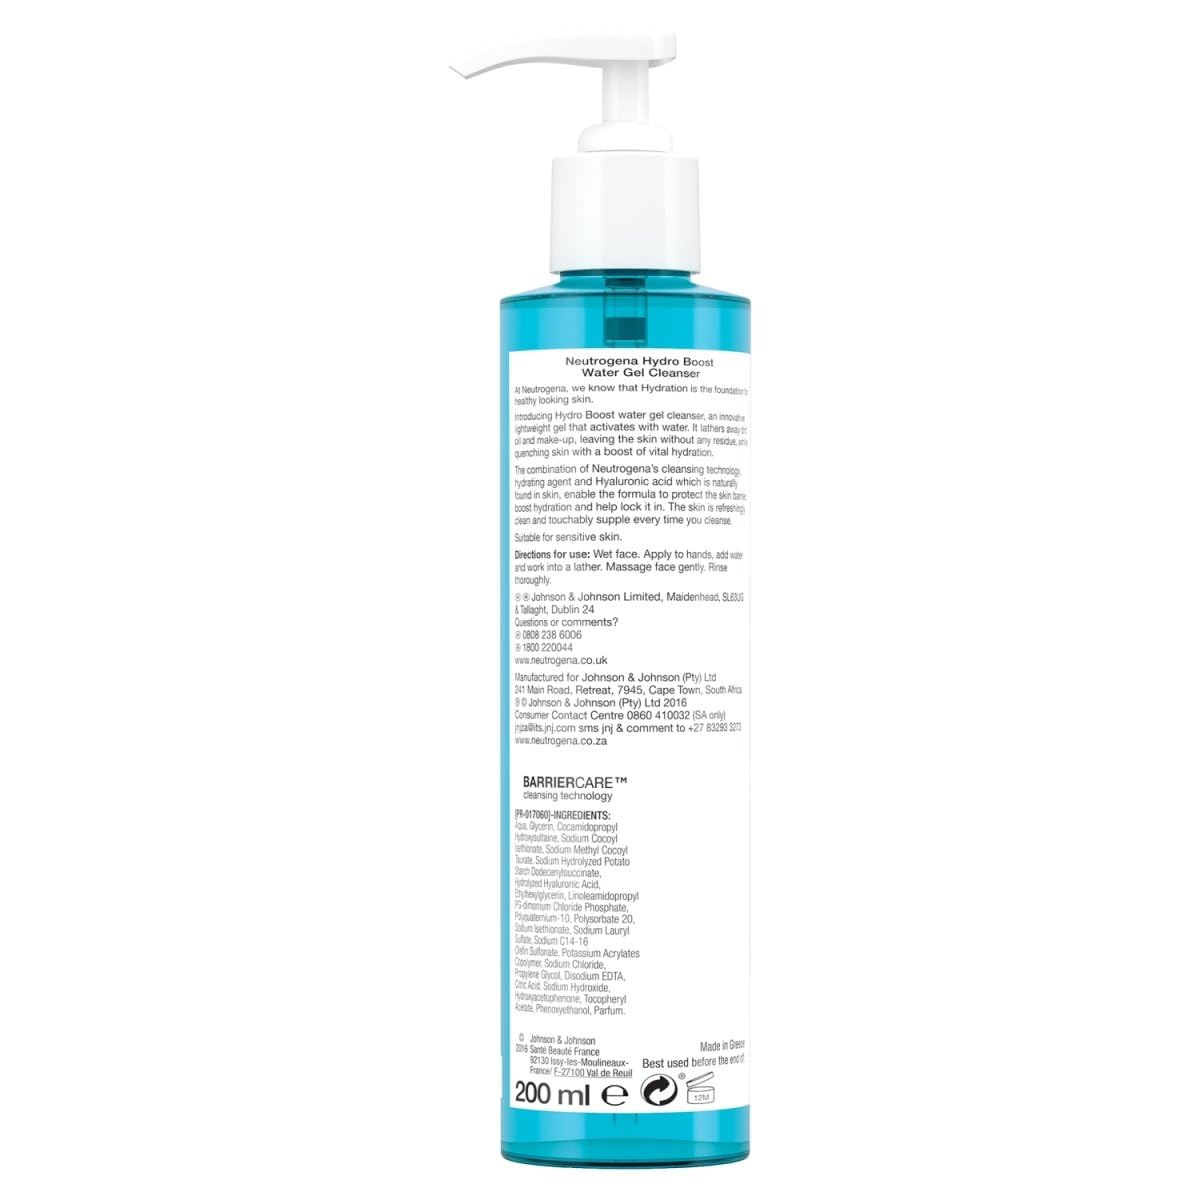 Neutrogena Hydro Boost Lightweight Hydrating Facial Cleansing Gel, Gentle Face Wash & Makeup Remover with Hyaluronic Acid, Hypoallergenic & Non Comedogenic, 6 oz